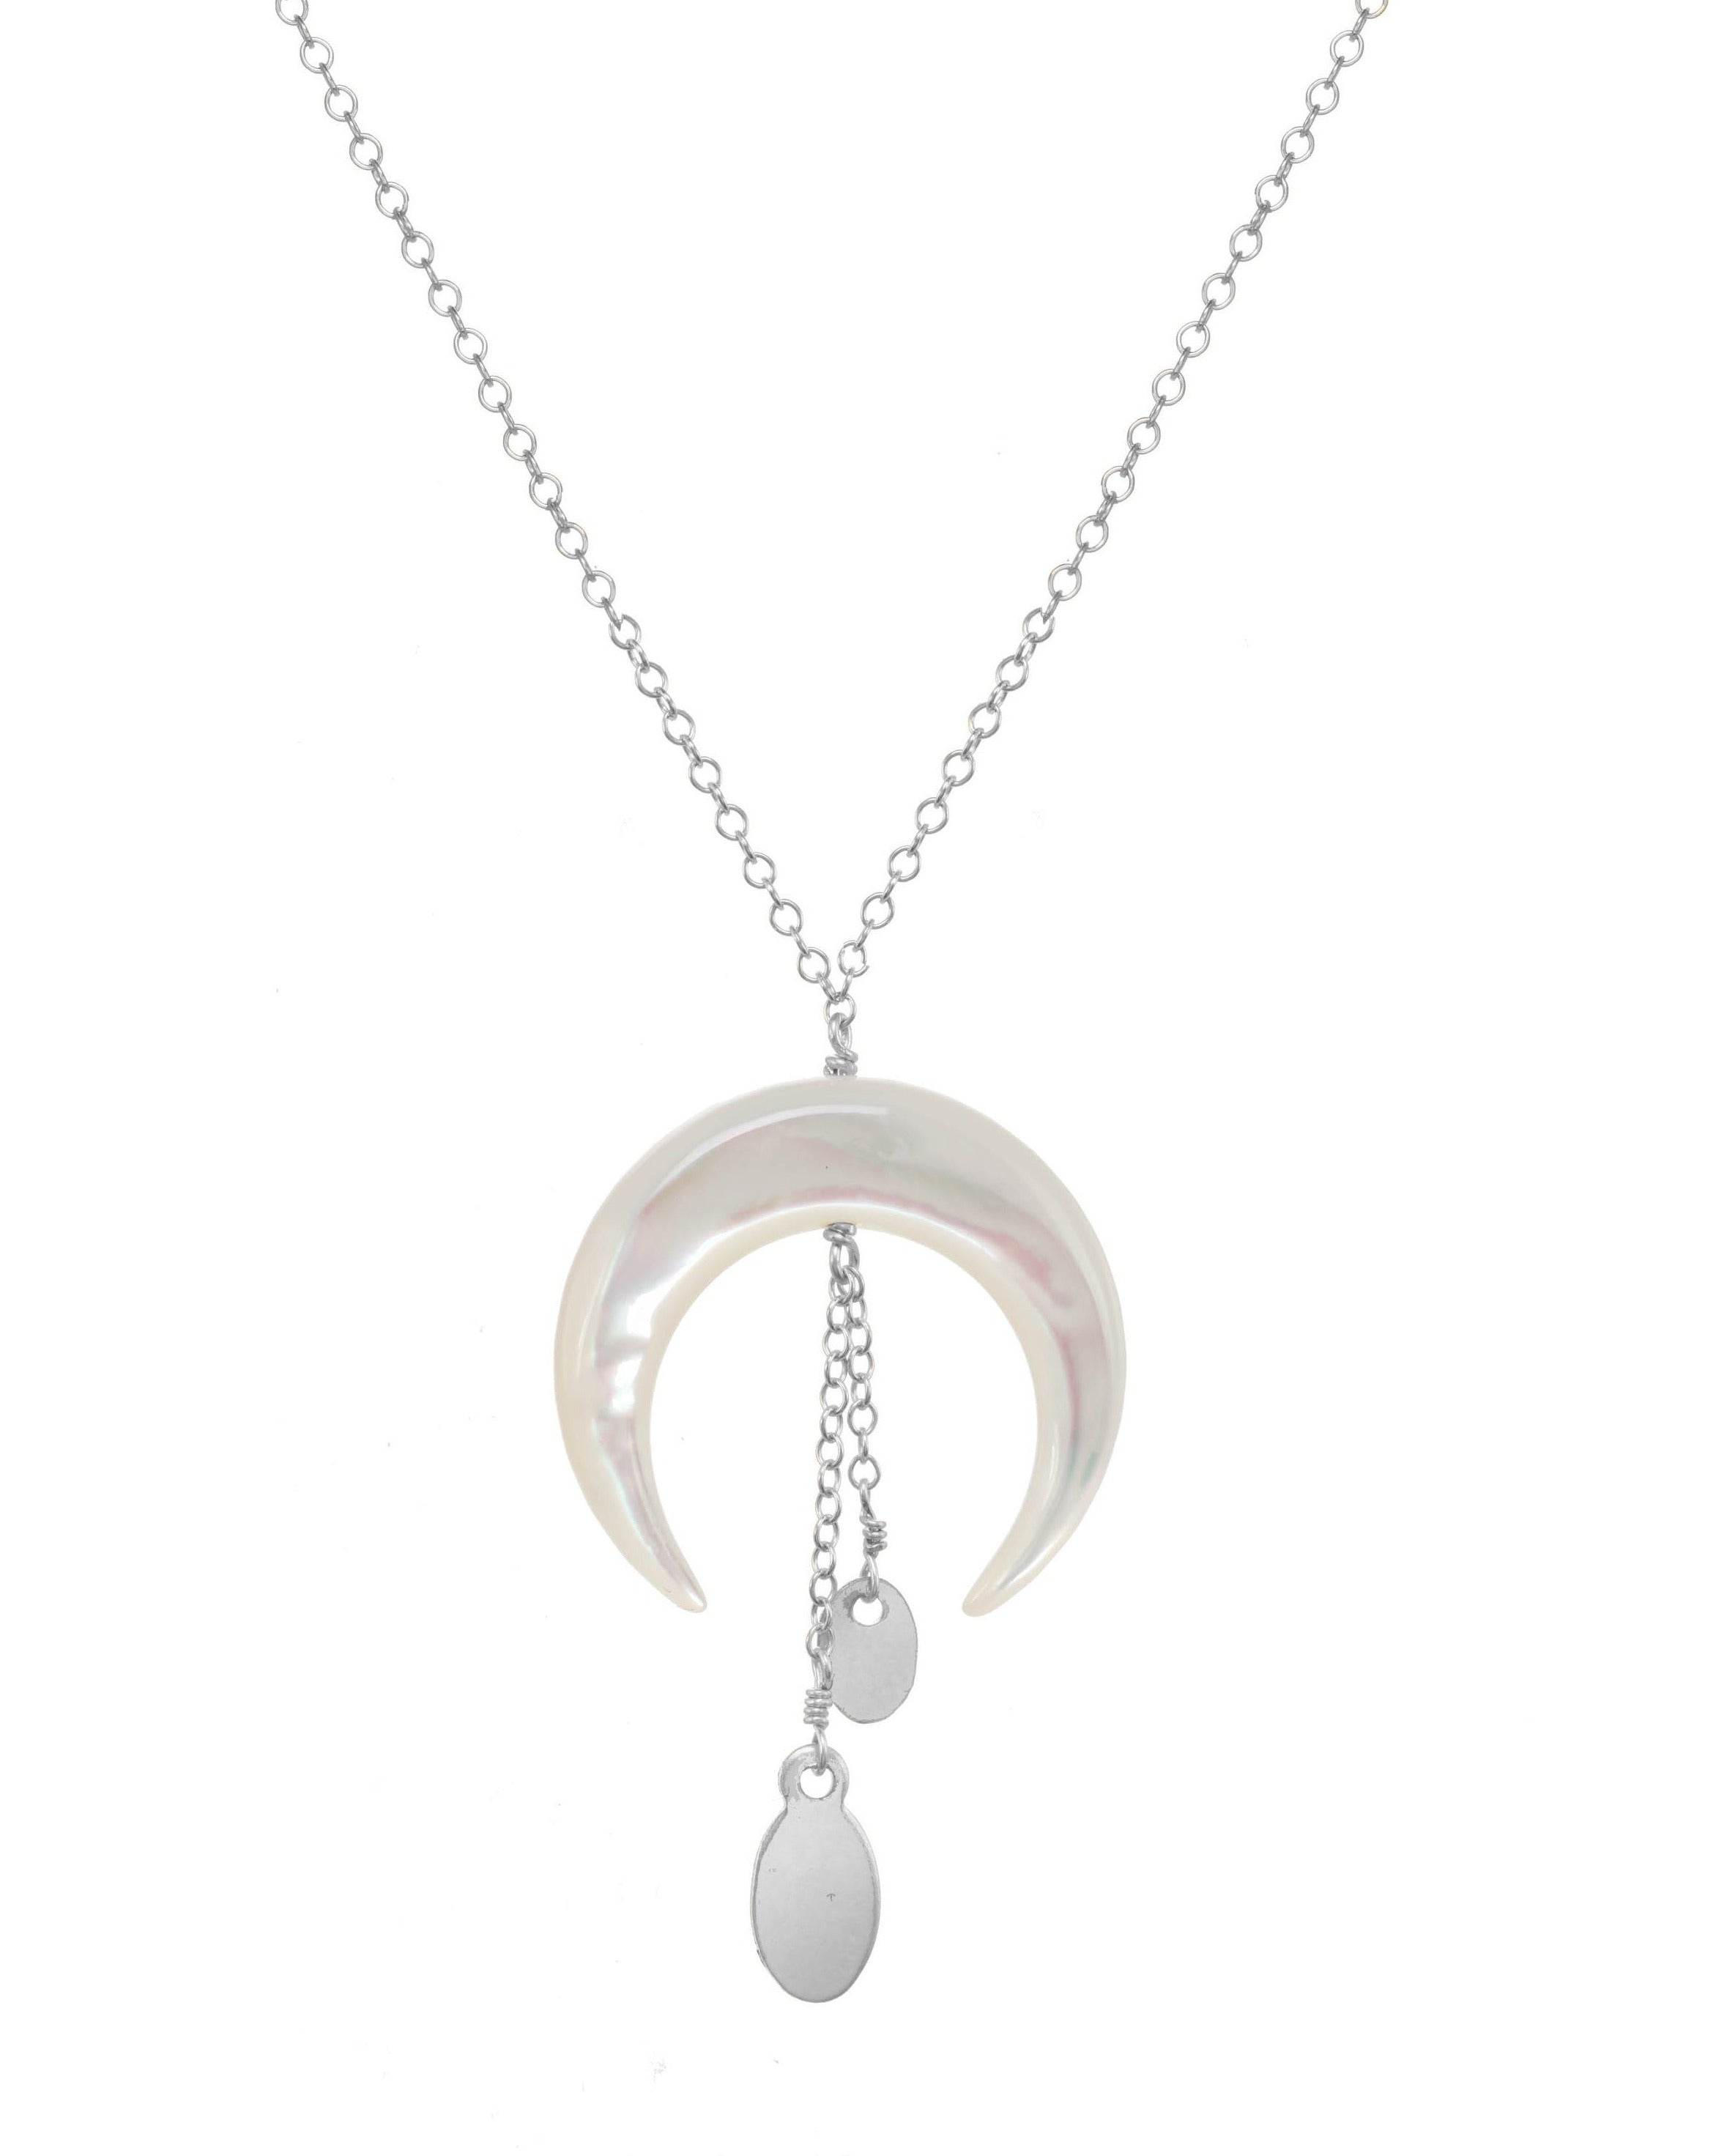 Baque Monita Necklace by KOZAKH. A 16 to 18 inch adjustable length necklace in Sterling Silver, featuring a hand-carved Mother of Pearl moon charm and a 1/2 inch chain drop.